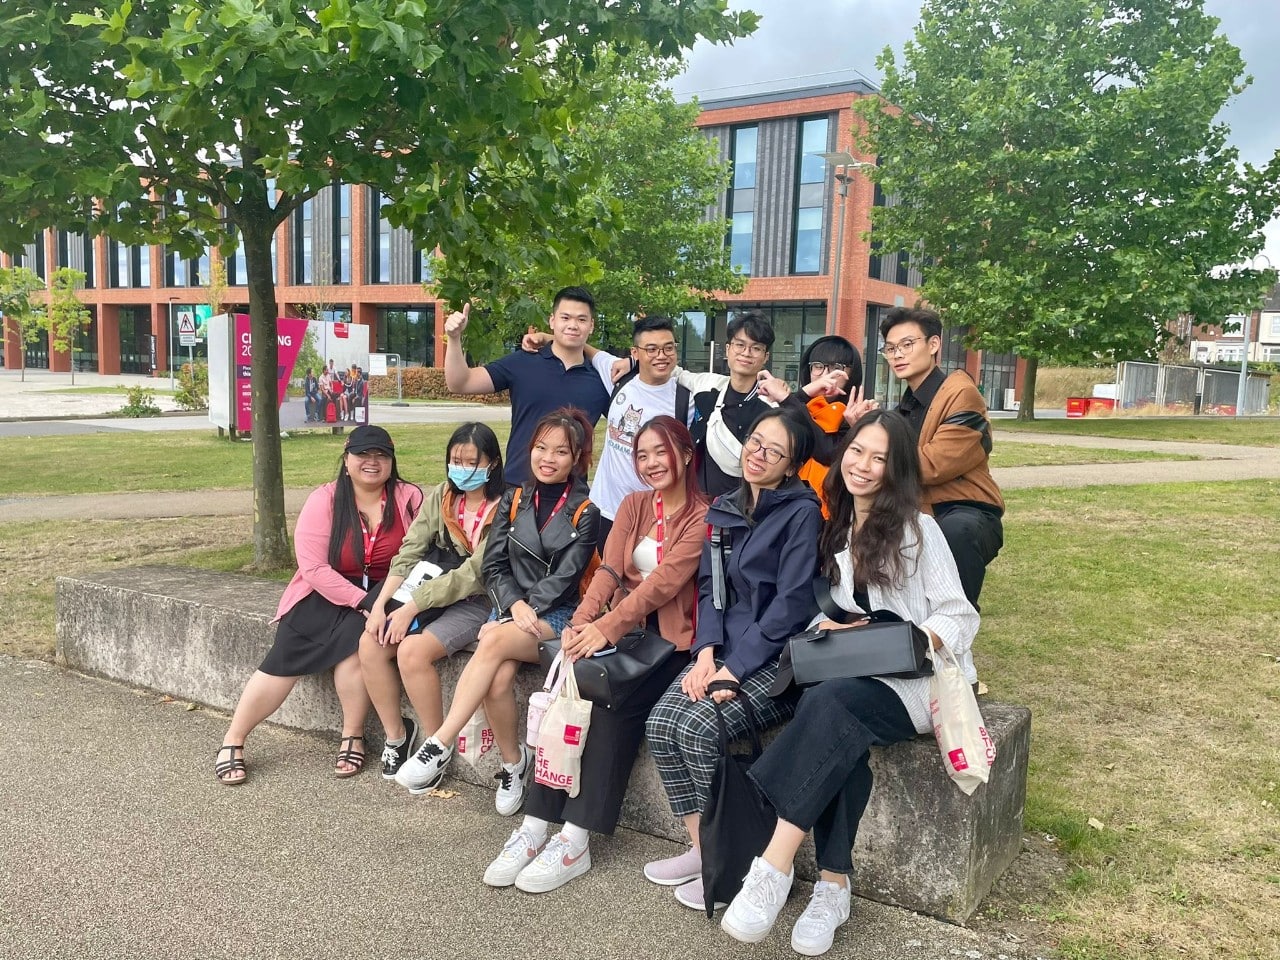 UK Trip 2022: 14 days of exploring the UK with BUV students